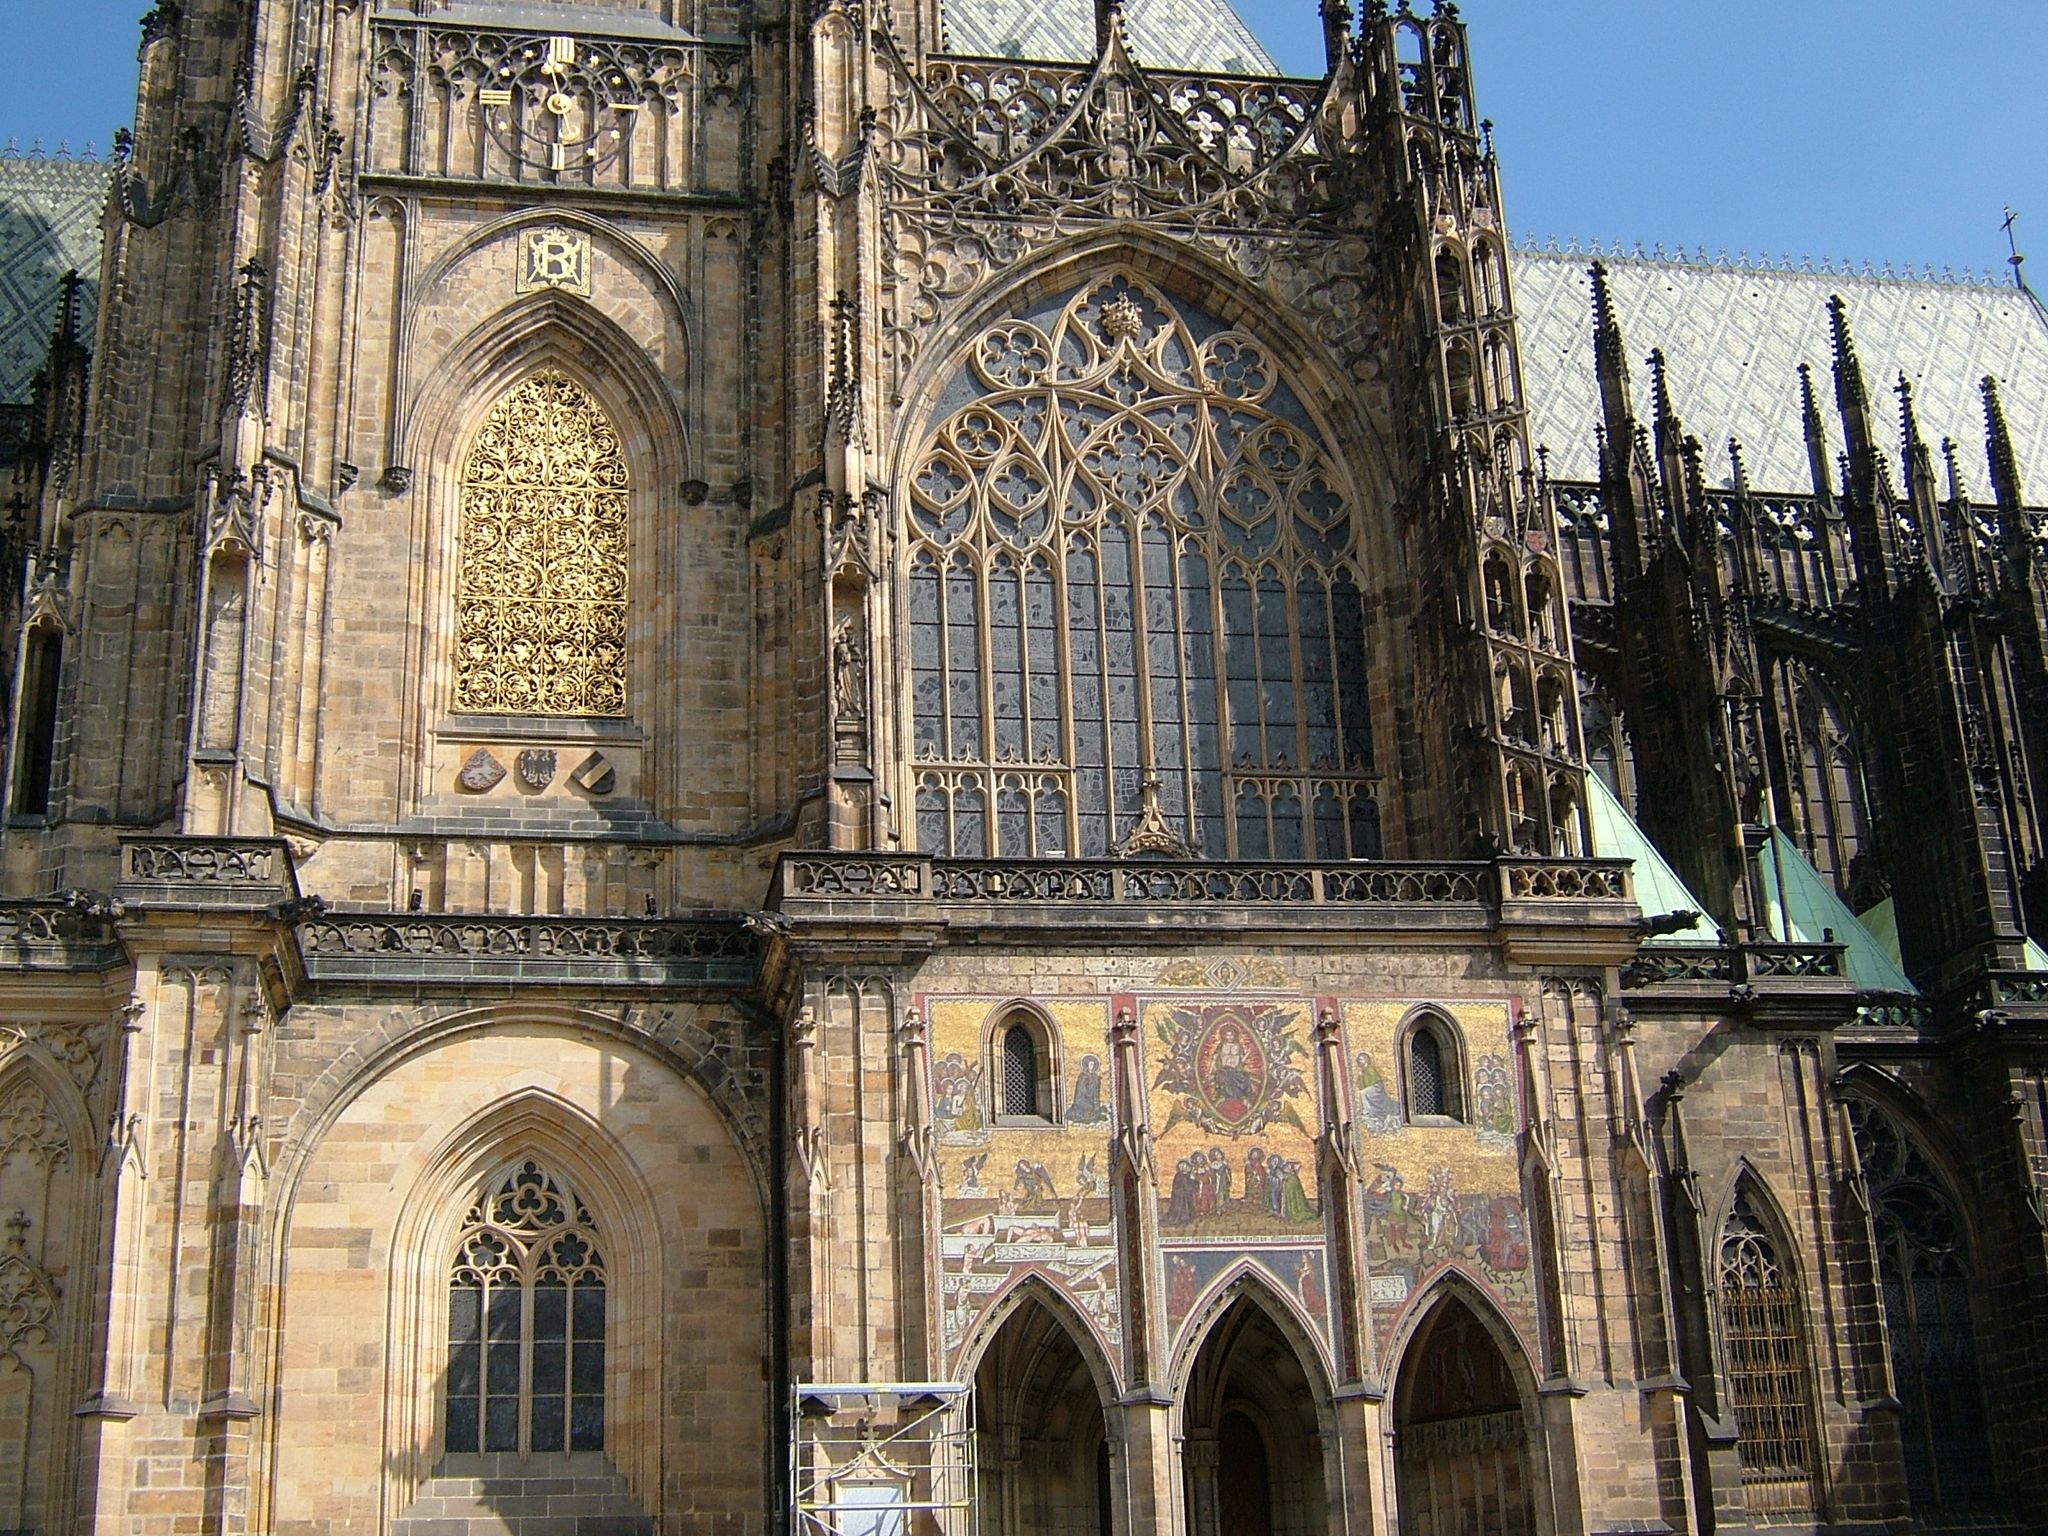 Photo 5 of 31 from the album Highlights Prague 2004.